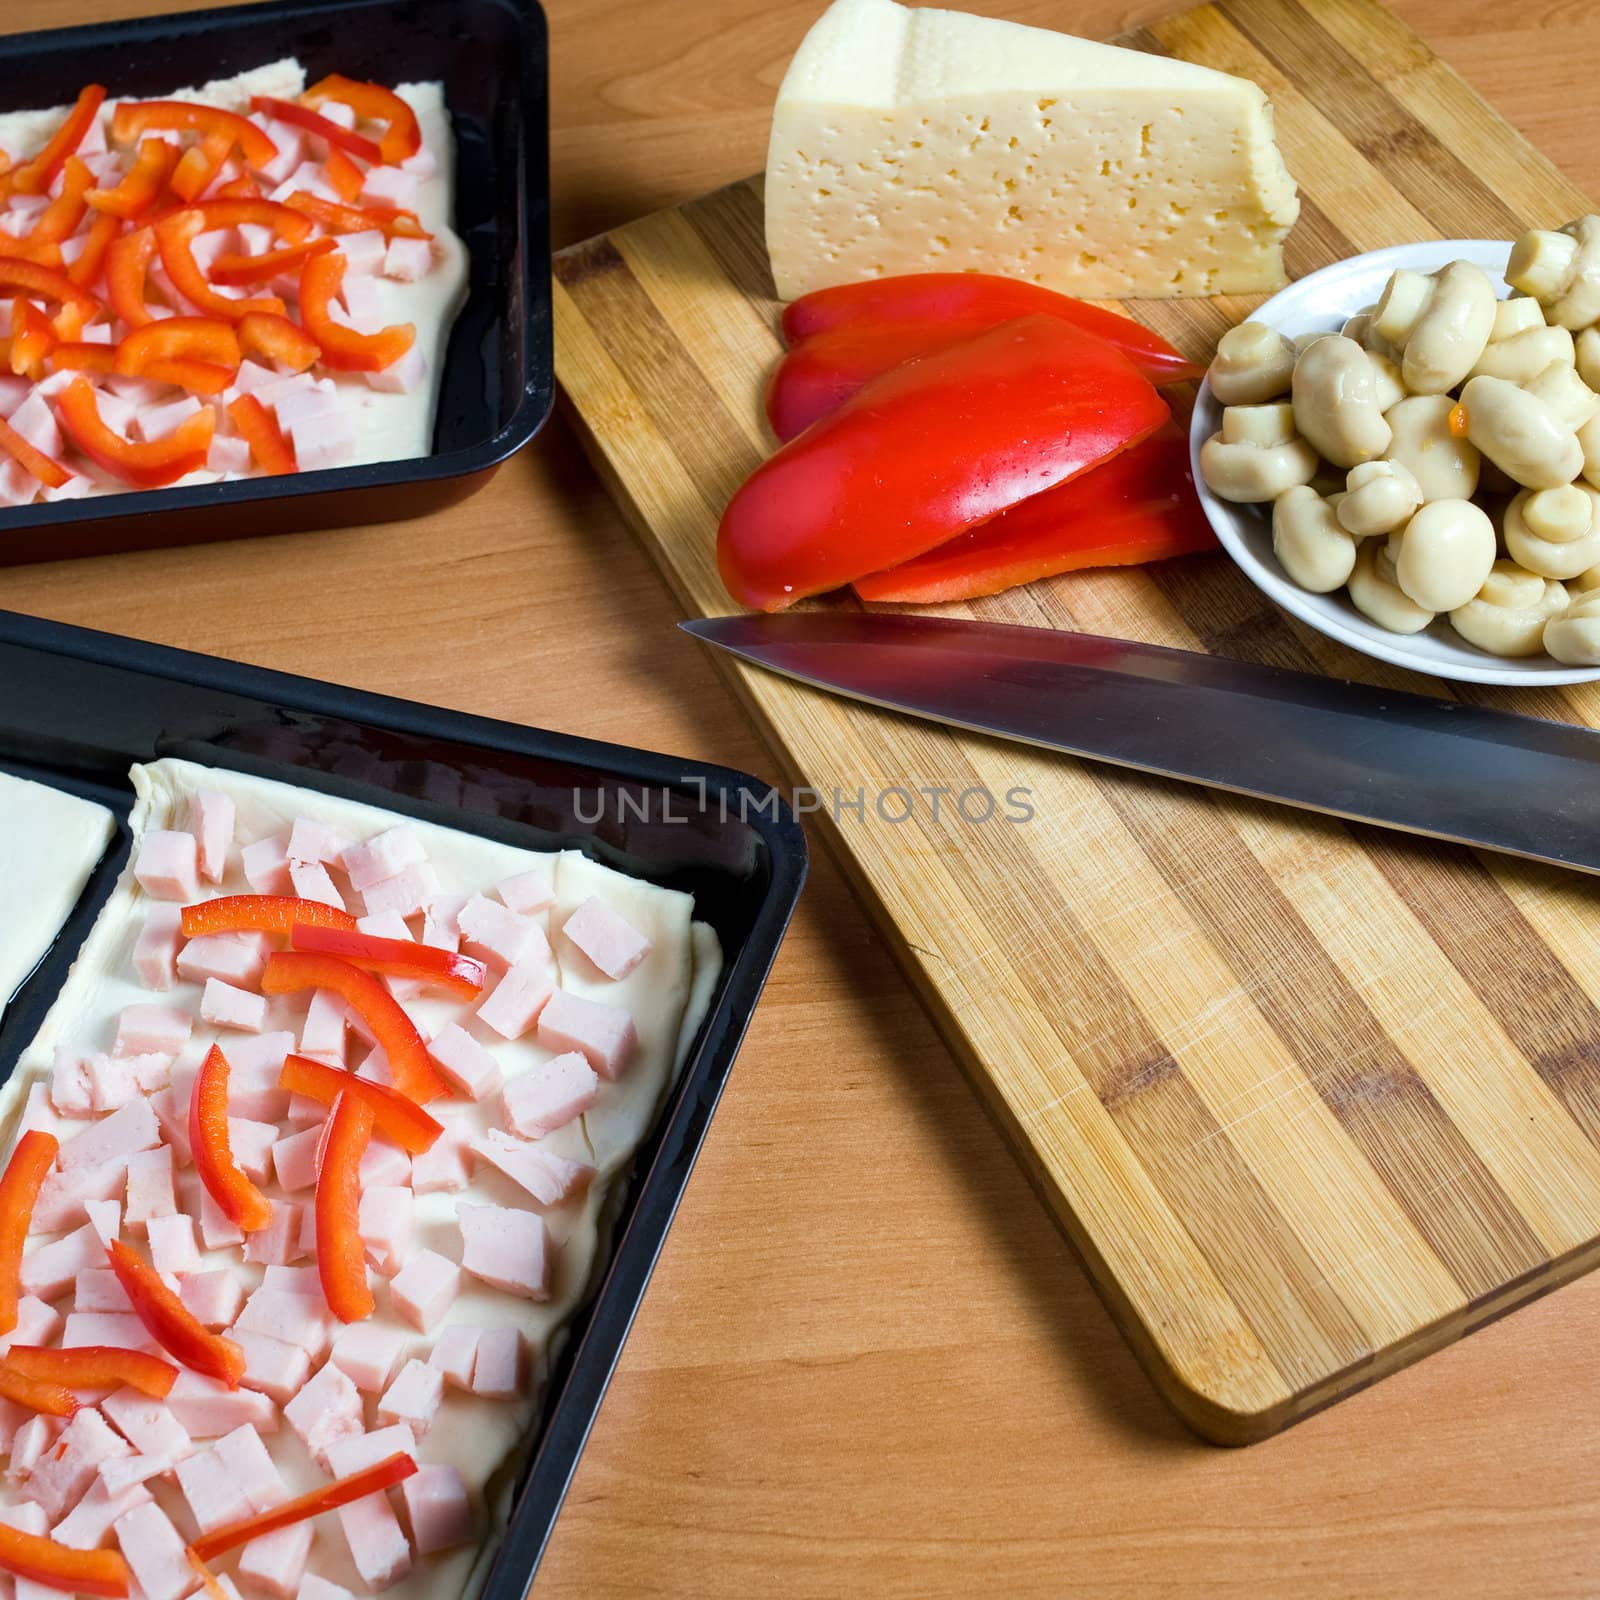 Stock photo: kitchen: an image of ingredients for pizza  in the kitchen